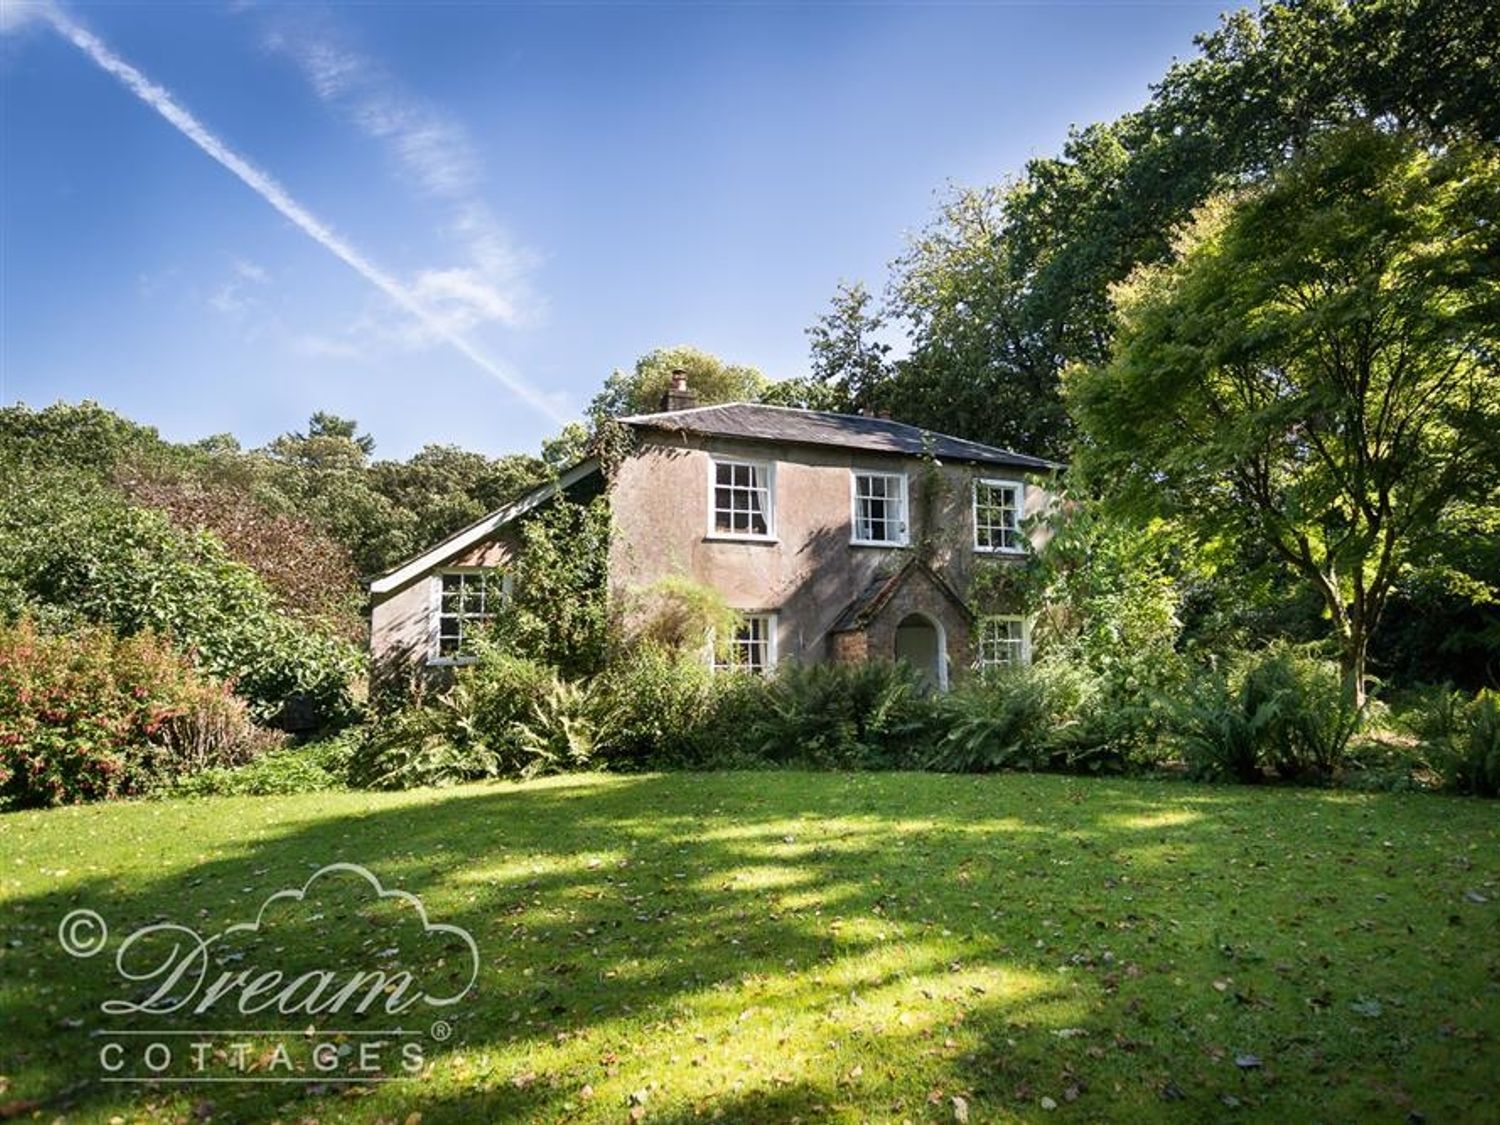 The Old Post Office Cottage - Dorset - 994562 - photo 1